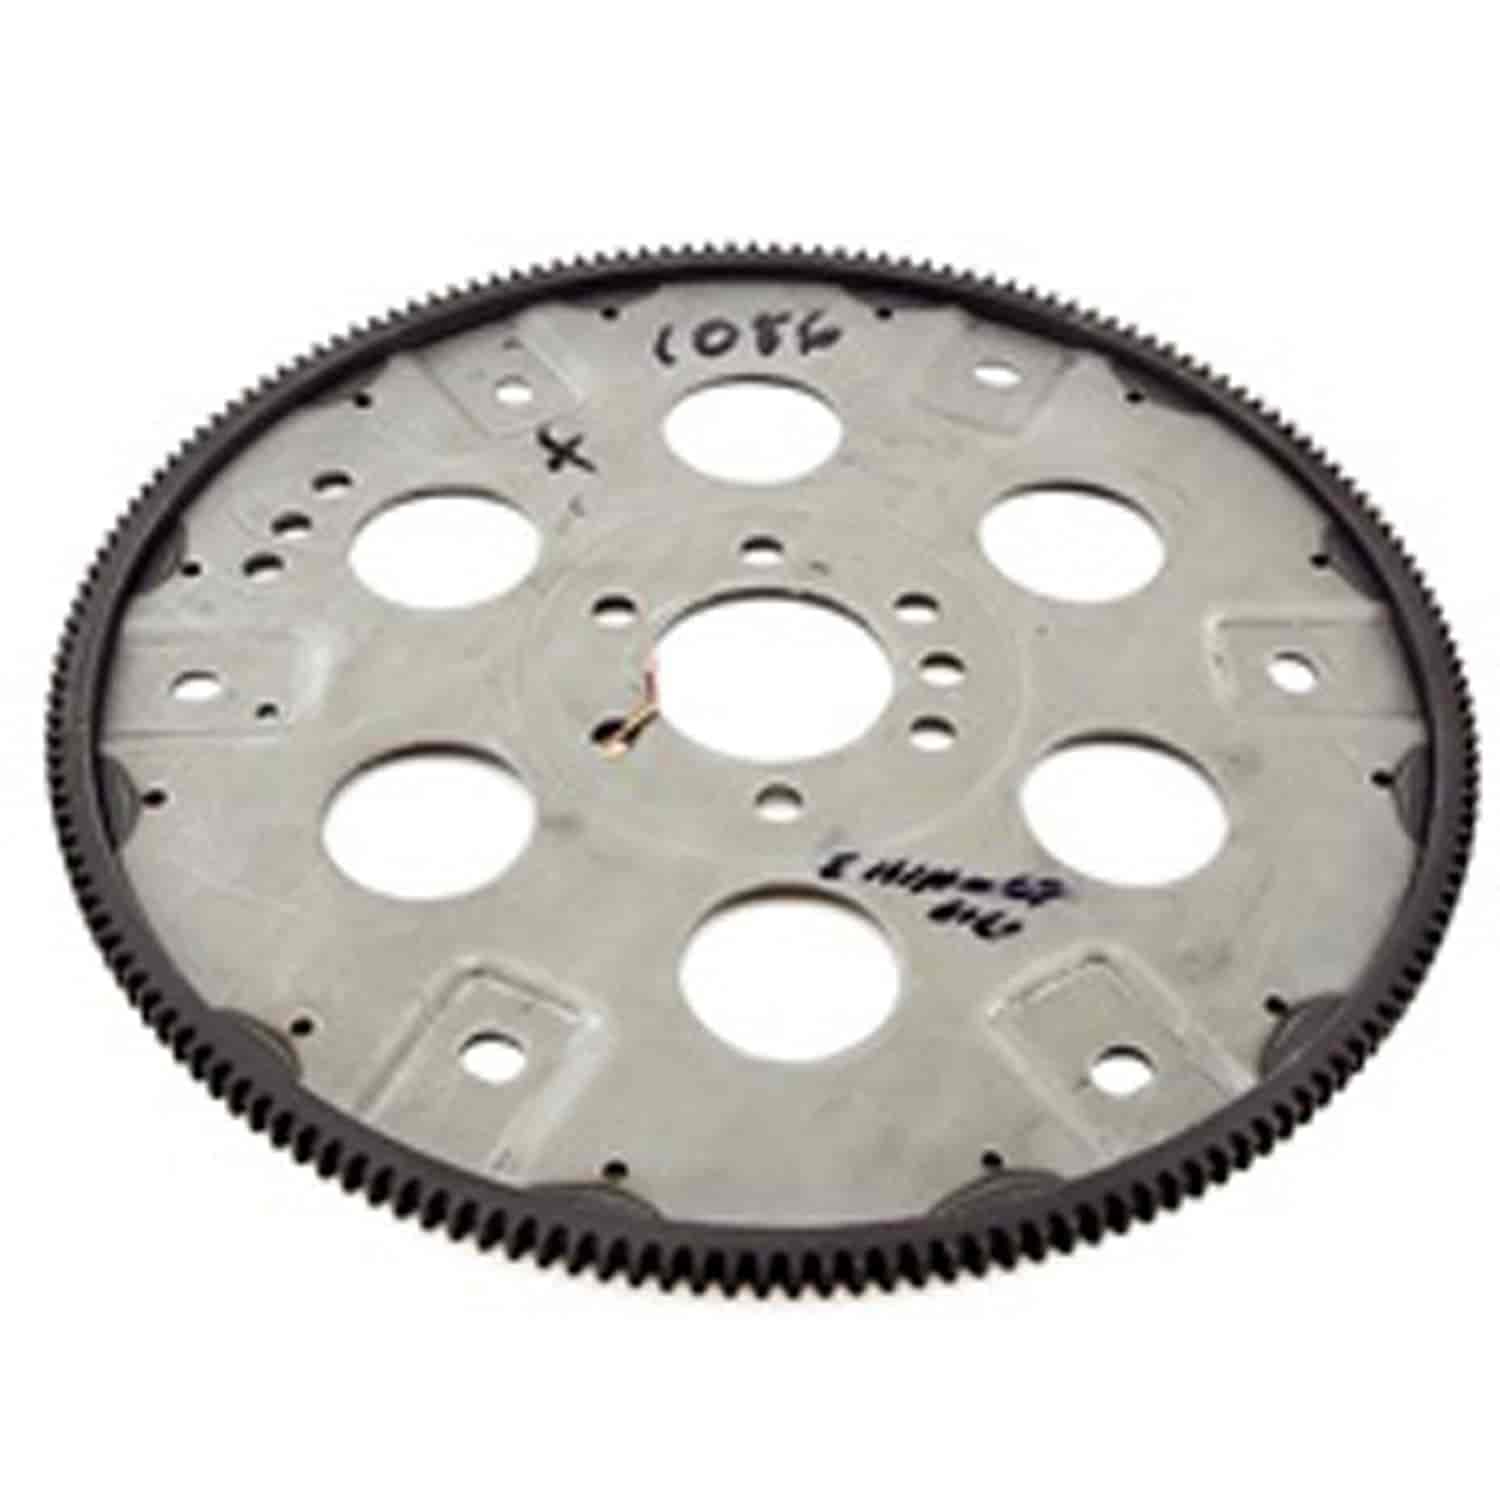 This automatic transmission flexplate from Omix-ADA fits 70-85 Jeep CJ models with a GM V8 engine conversion.